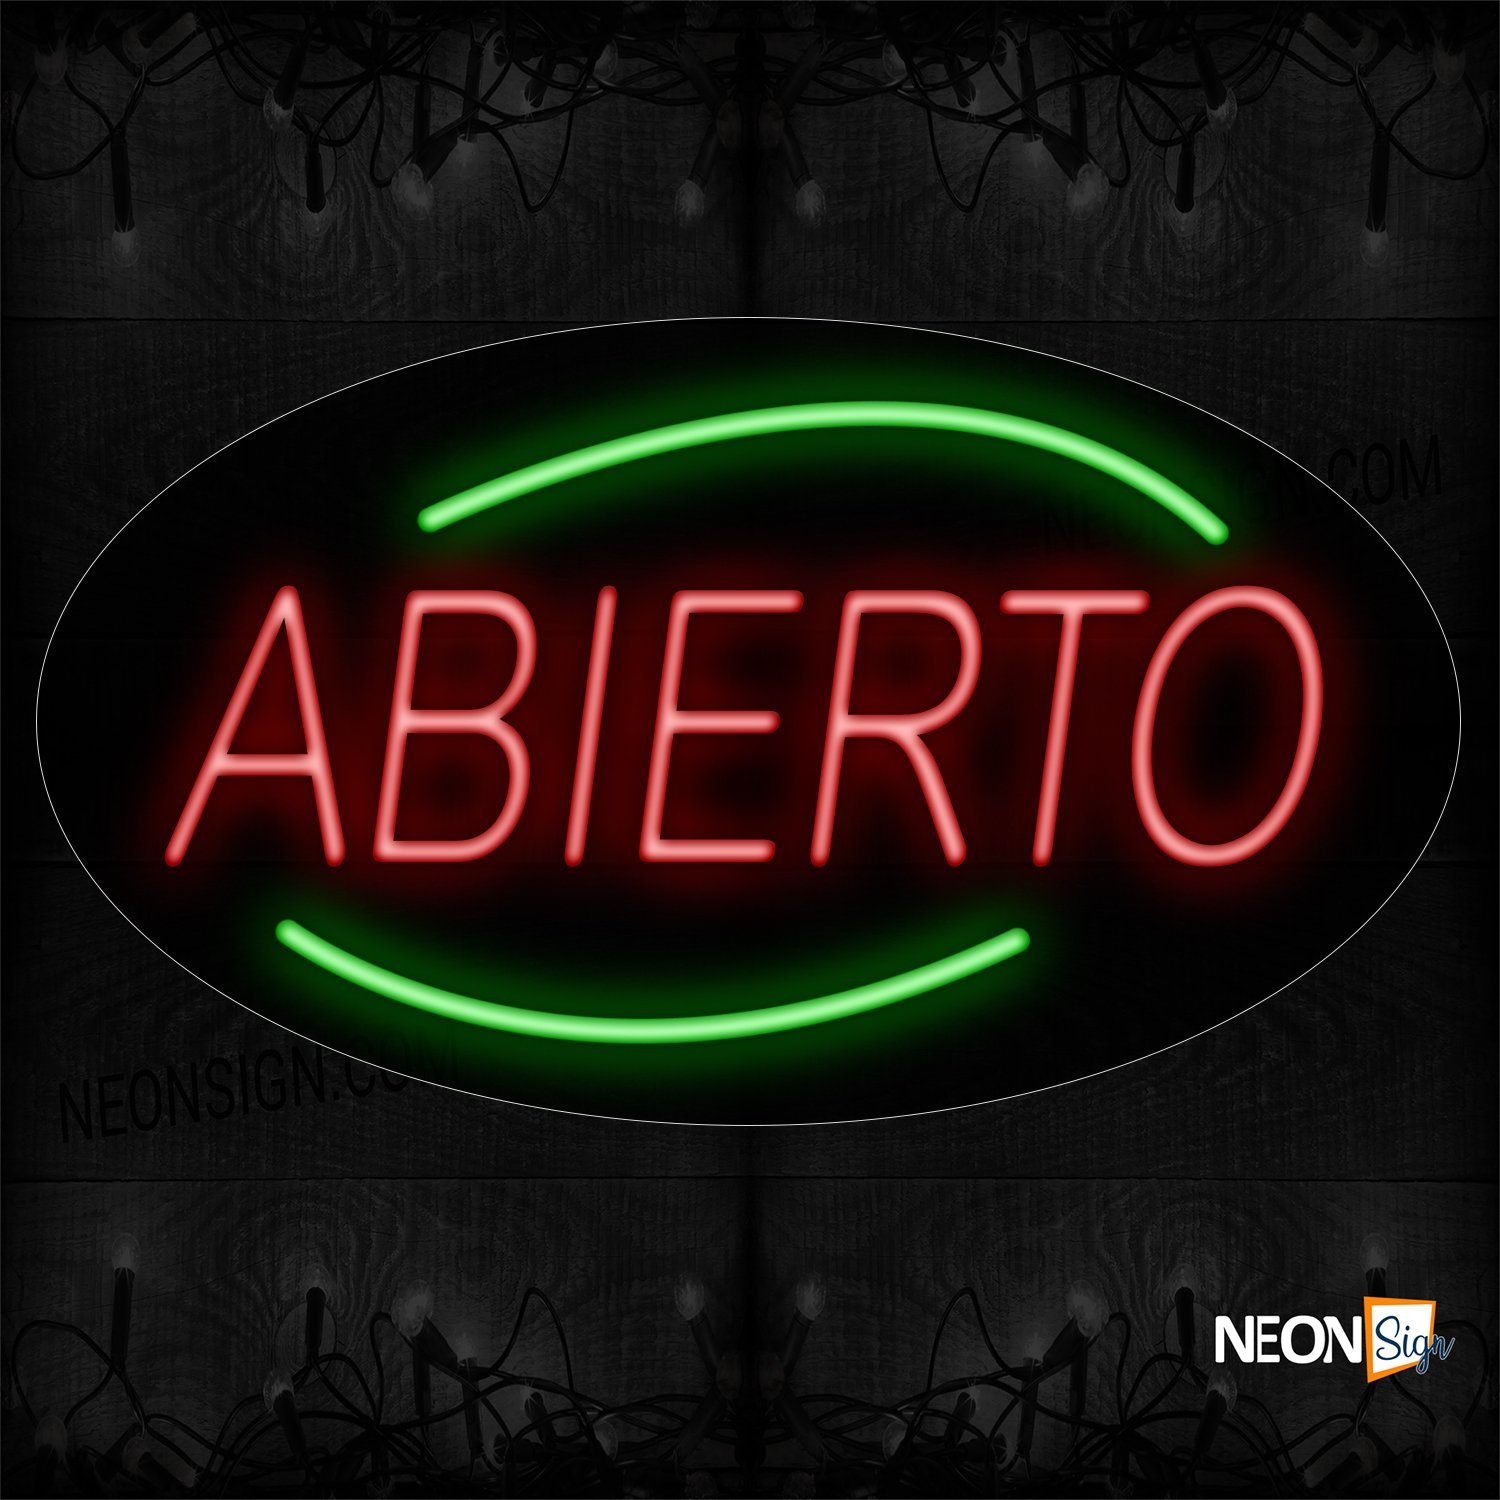 Image of Abierto In Red With Green Arc Border Neon Sign